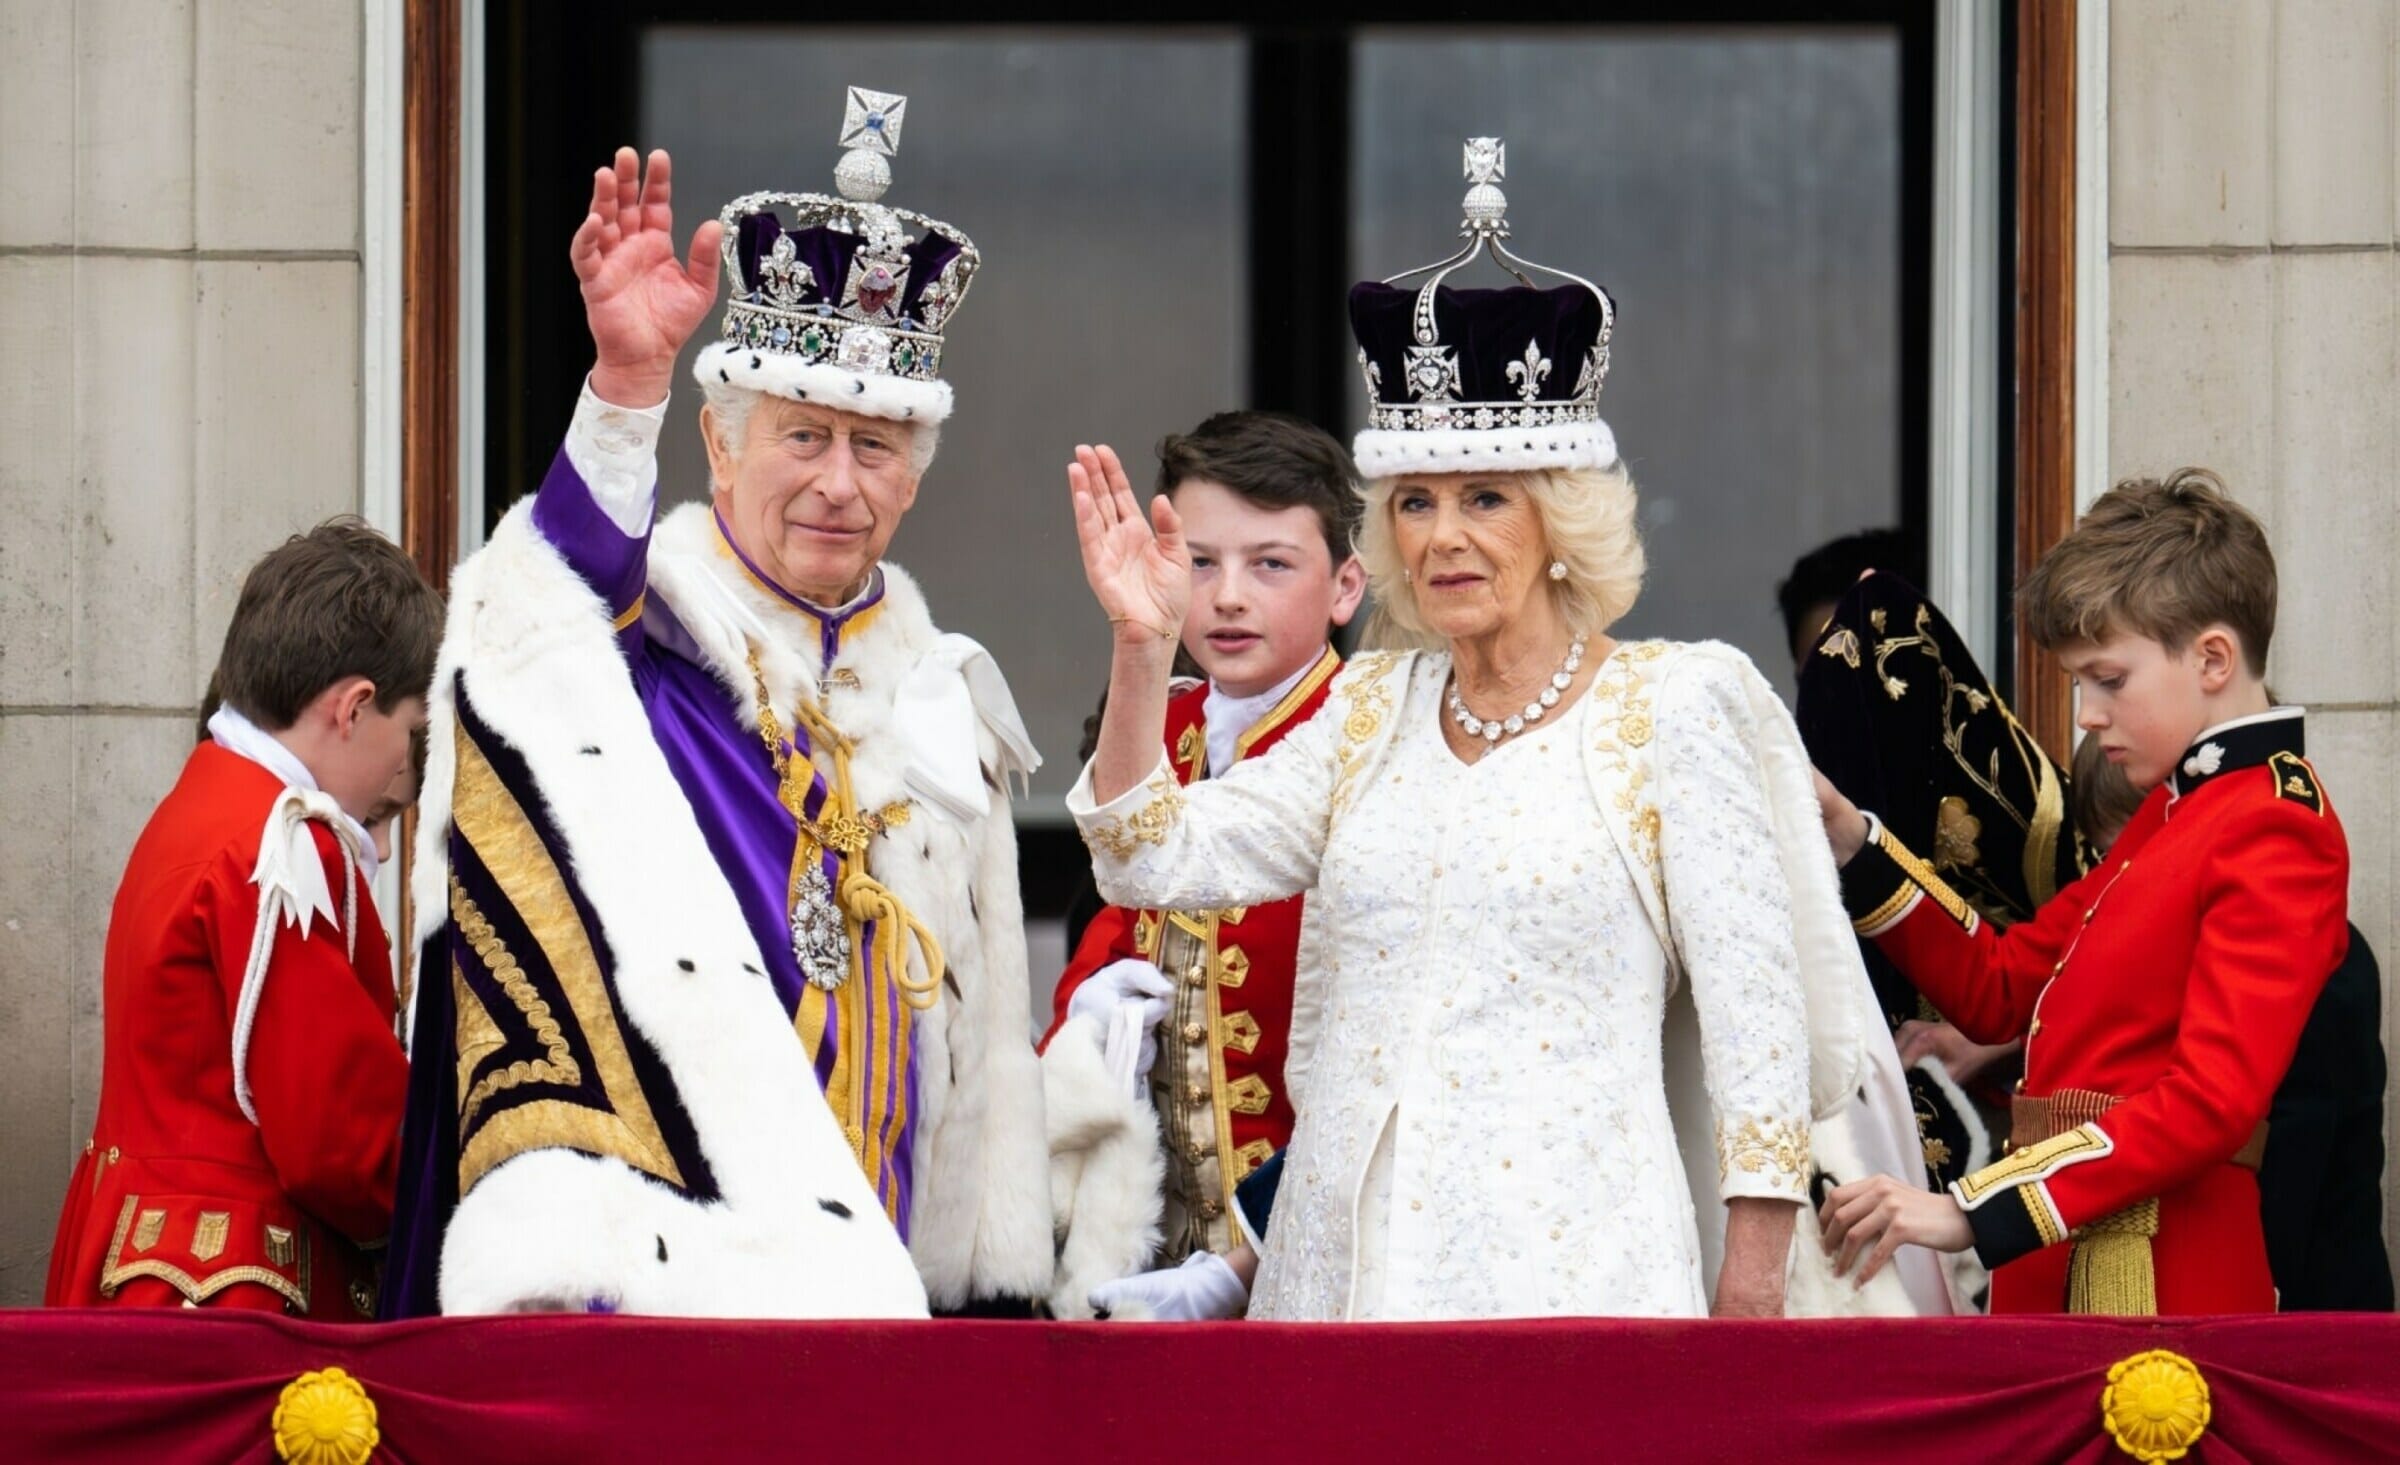 Events on this King's Birthday Holiday